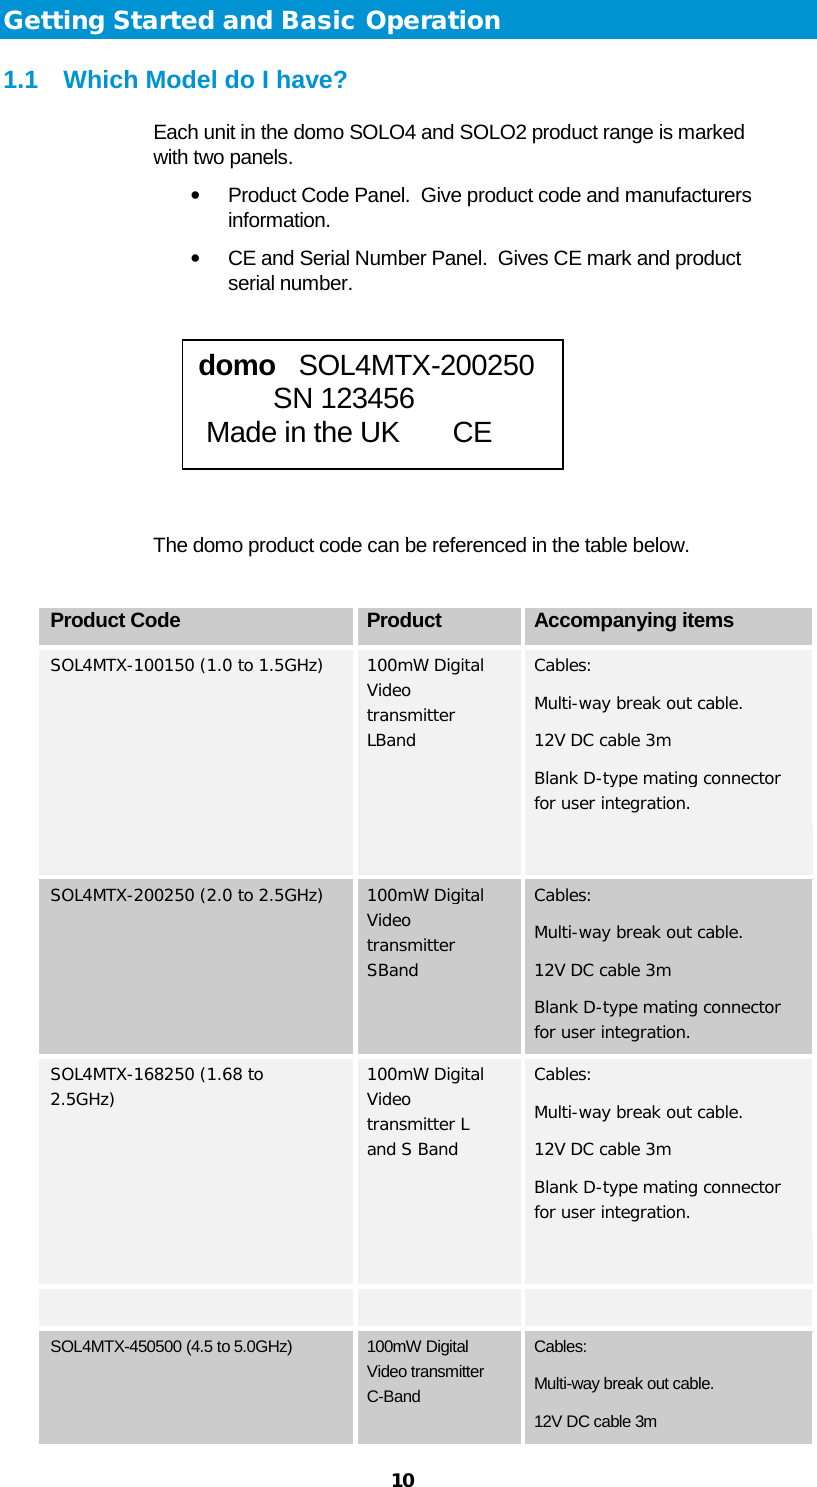  10 Getting Started and Basic Operation 1.1 Which Model do I have? Each unit in the domo SOLO4 and SOLO2 product range is marked with two panels.  • Product Code Panel.  Give product code and manufacturers information. • CE and Serial Number Panel.  Gives CE mark and product serial number.       The domo product code can be referenced in the table below.  Product Code Product Accompanying items SOL4MTX-100150 (1.0 to 1.5GHz)   100mW Digital Video transmitter LBand    Cables: Multi-way break out cable. 12V DC cable 3m Blank D-type mating connector for user integration. SOL4MTX-200250 (2.0 to 2.5GHz) 100mW Digital Video transmitter SBand Cables: Multi-way break out cable. 12V DC cable 3m Blank D-type mating connector for user integration. SOL4MTX-168250 (1.68 to 2.5GHz)   100mW Digital Video transmitter L and S Band    Cables: Multi-way break out cable. 12V DC cable 3m Blank D-type mating connector for user integration.      SOL4MTX-450500 (4.5 to 5.0GHz)  100mW Digital Video transmitter C-Band Cables: Multi-way break out cable. 12V DC cable 3m domo   SOL4MTX-200250  SN 123456  Made in the UK       CE 